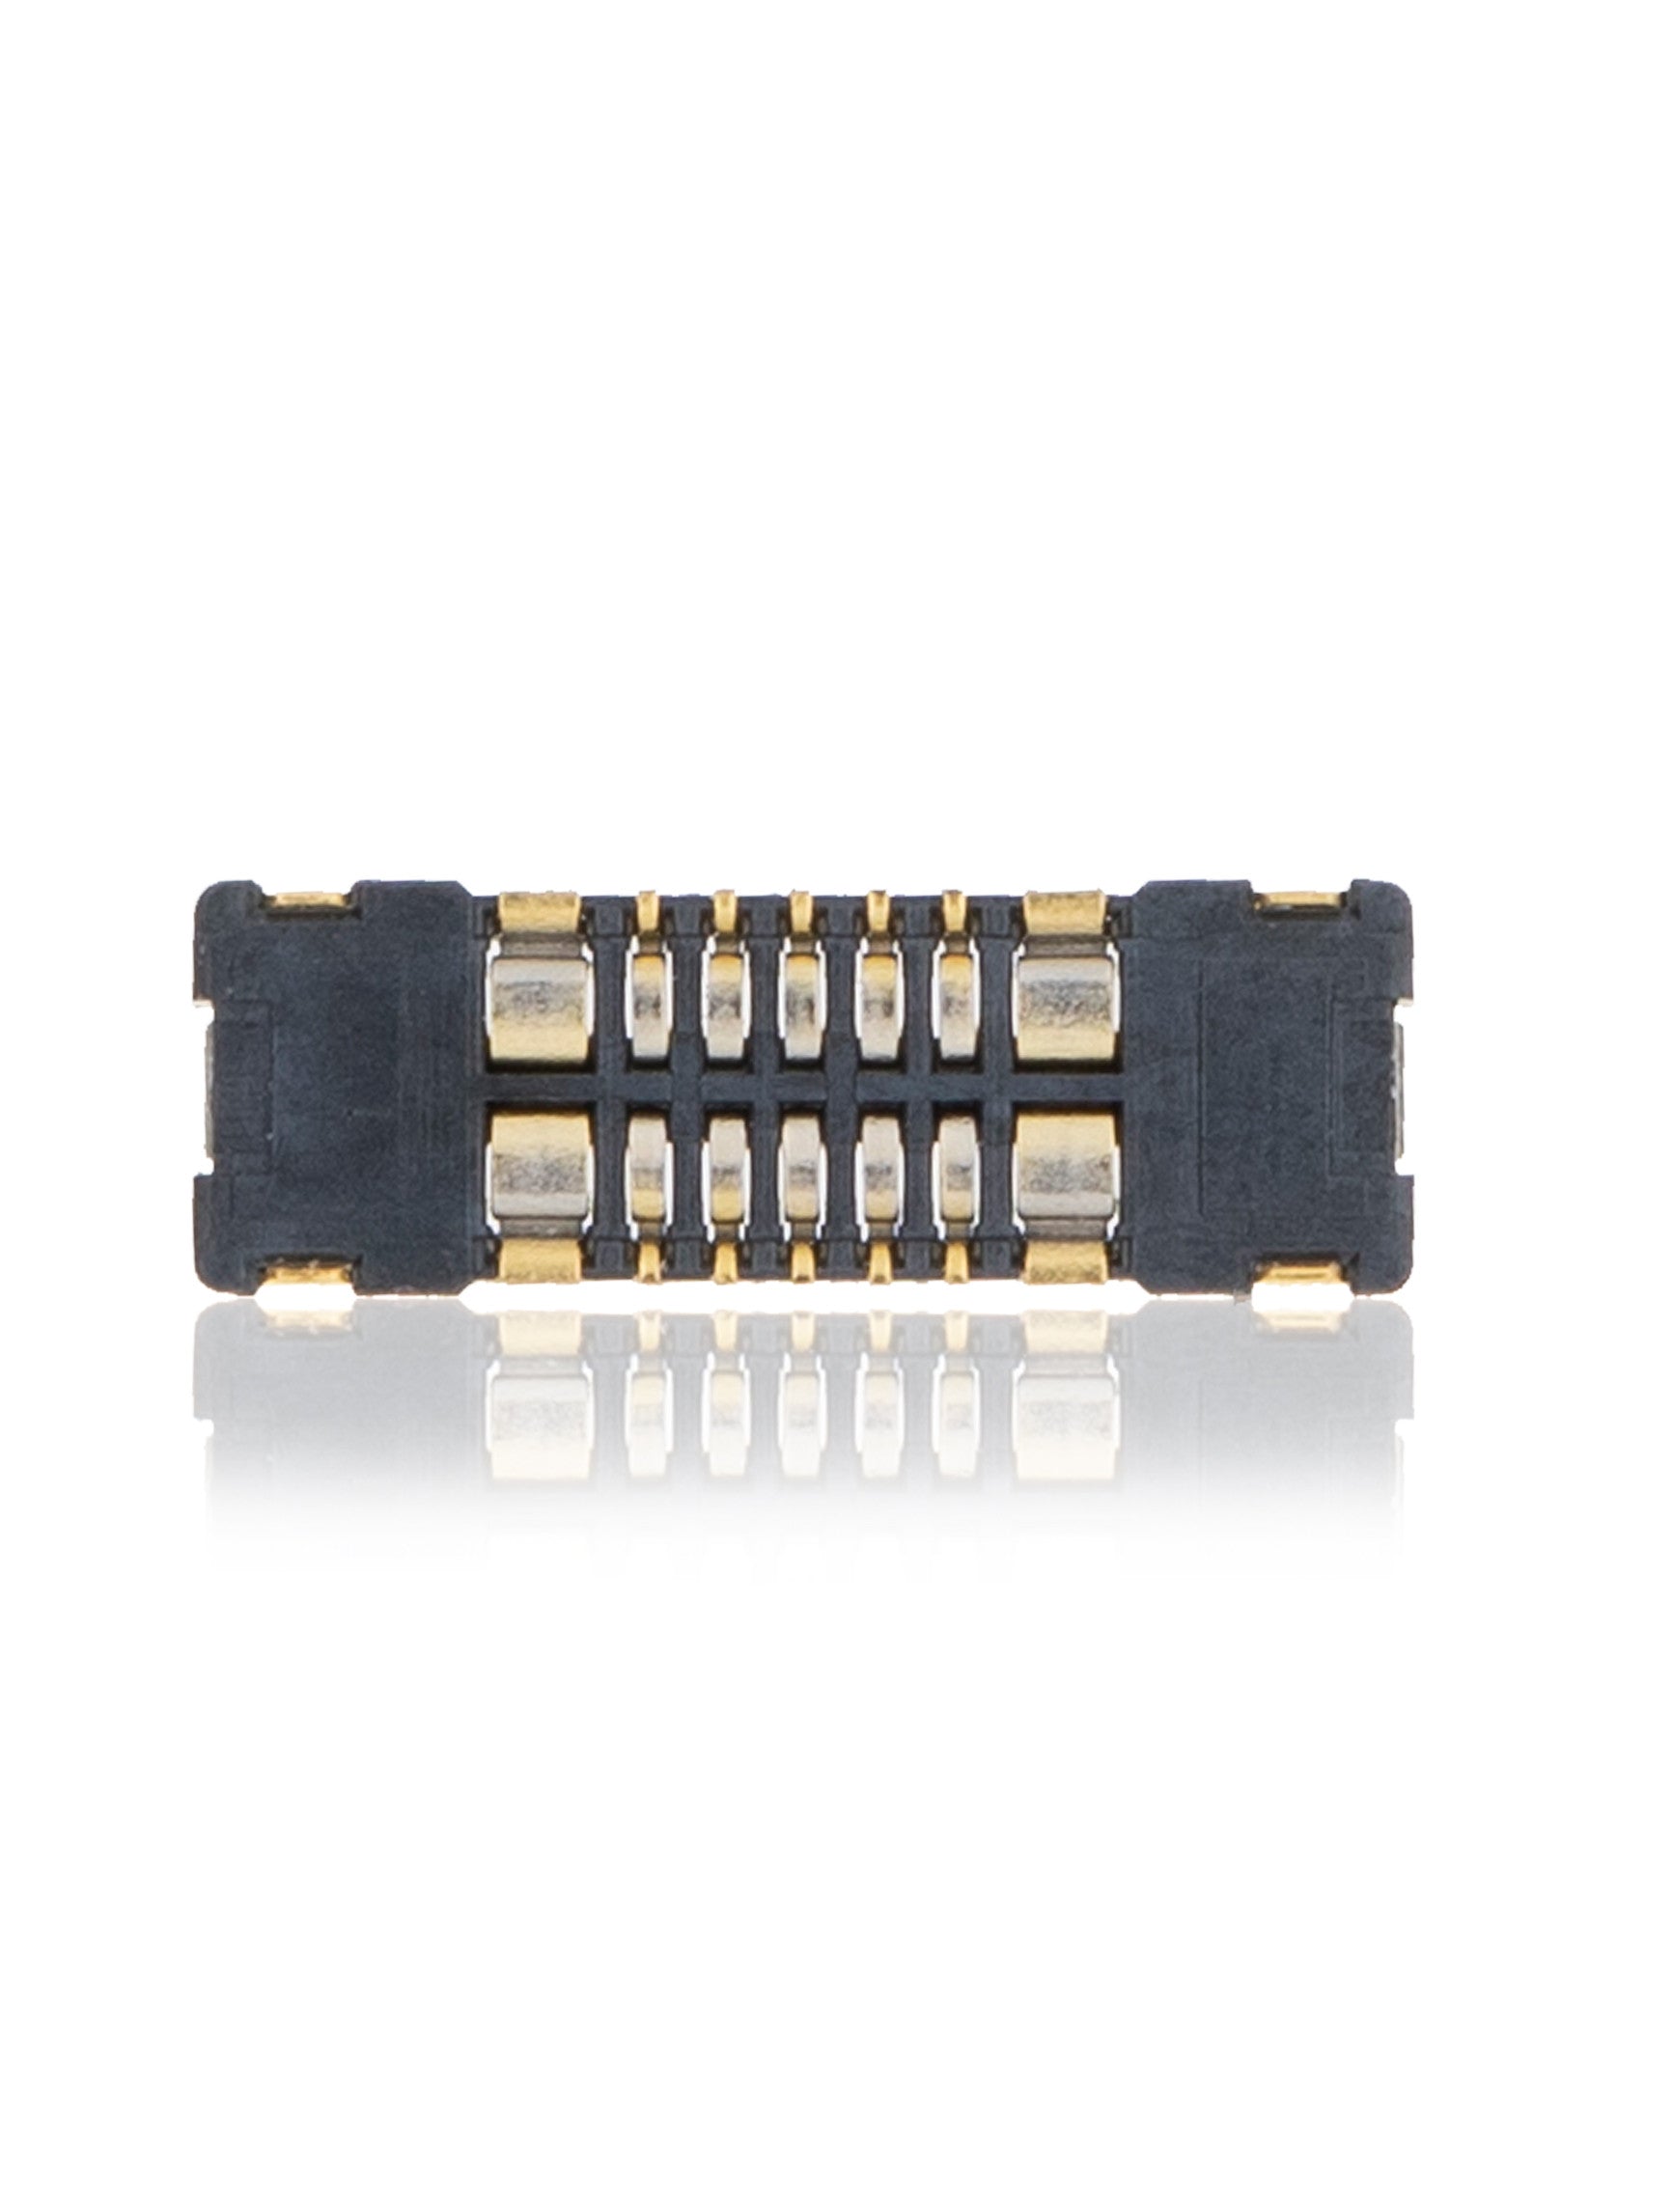 RECEIVER RANGE INDUCTOR ENVIRONMENT LIGHT SENSOR MICROPHONE FPC CONNECTOR COMPATIBLE WITH IPHONE XR (J4600: 28 PIN)